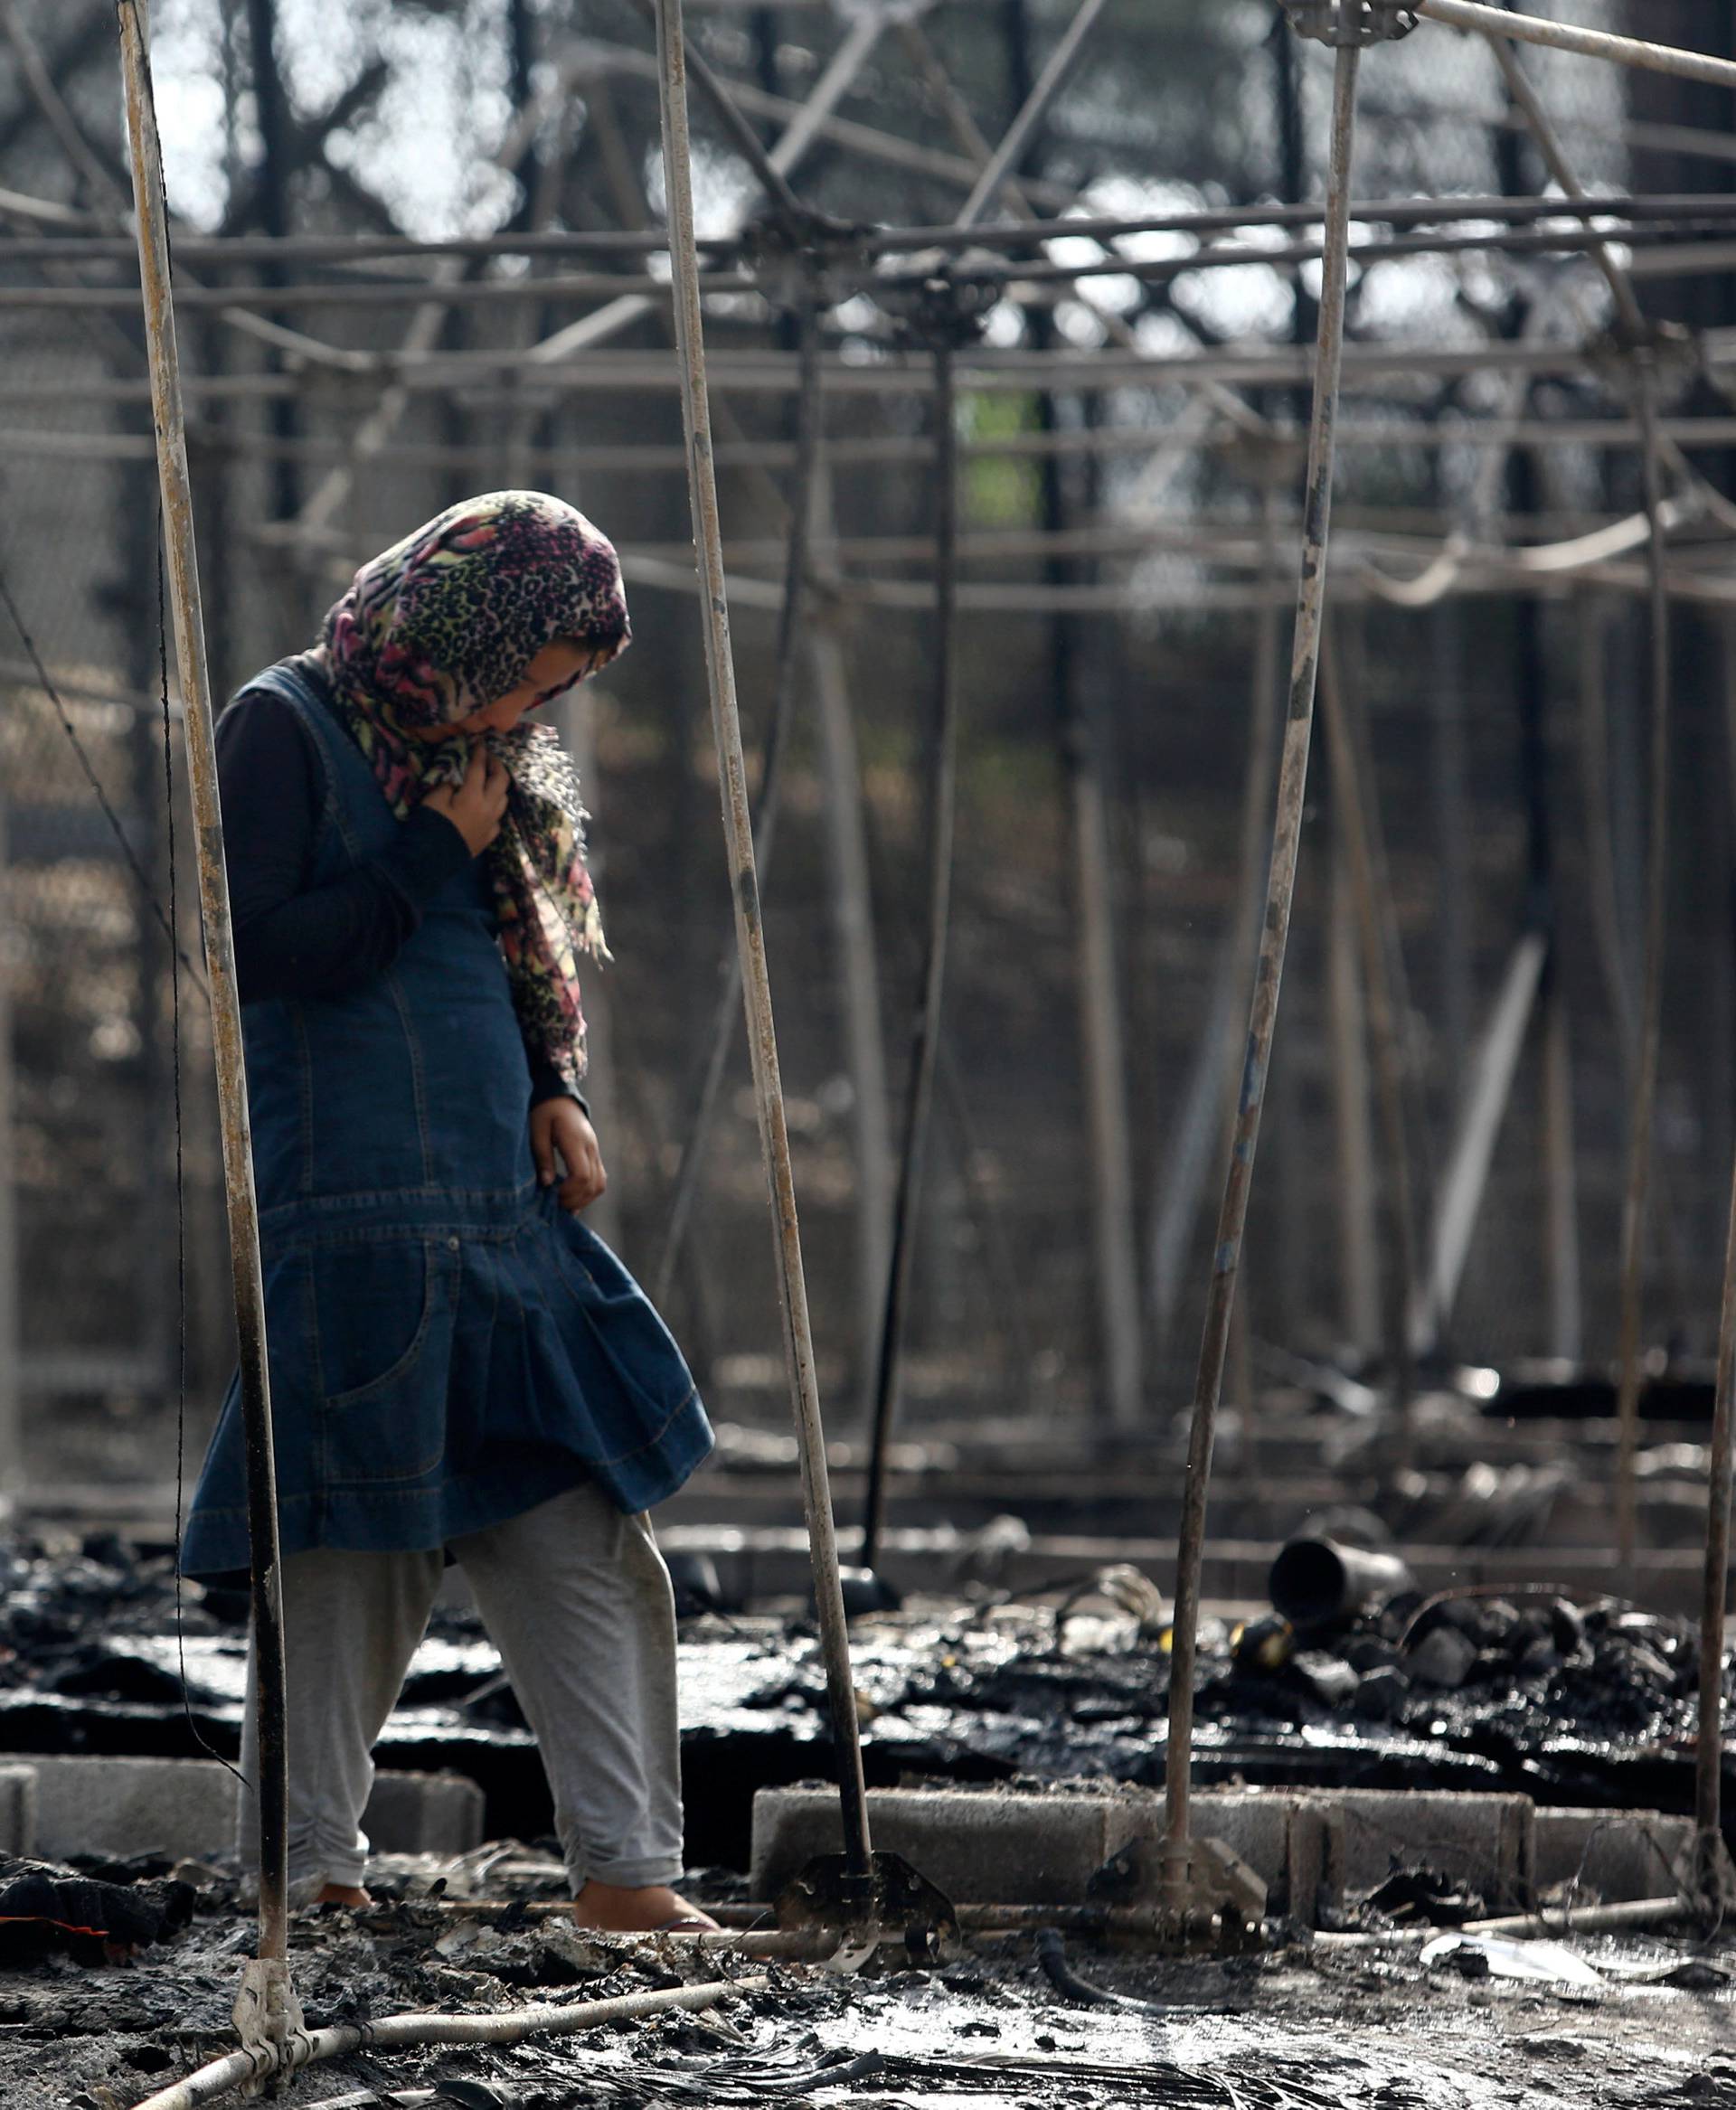 A migrant stands among the remains of a burned tent at the Moria migrant camp, after a fire that ripped through tents and destroyed containers during violence among residents, on the island of Lesbos